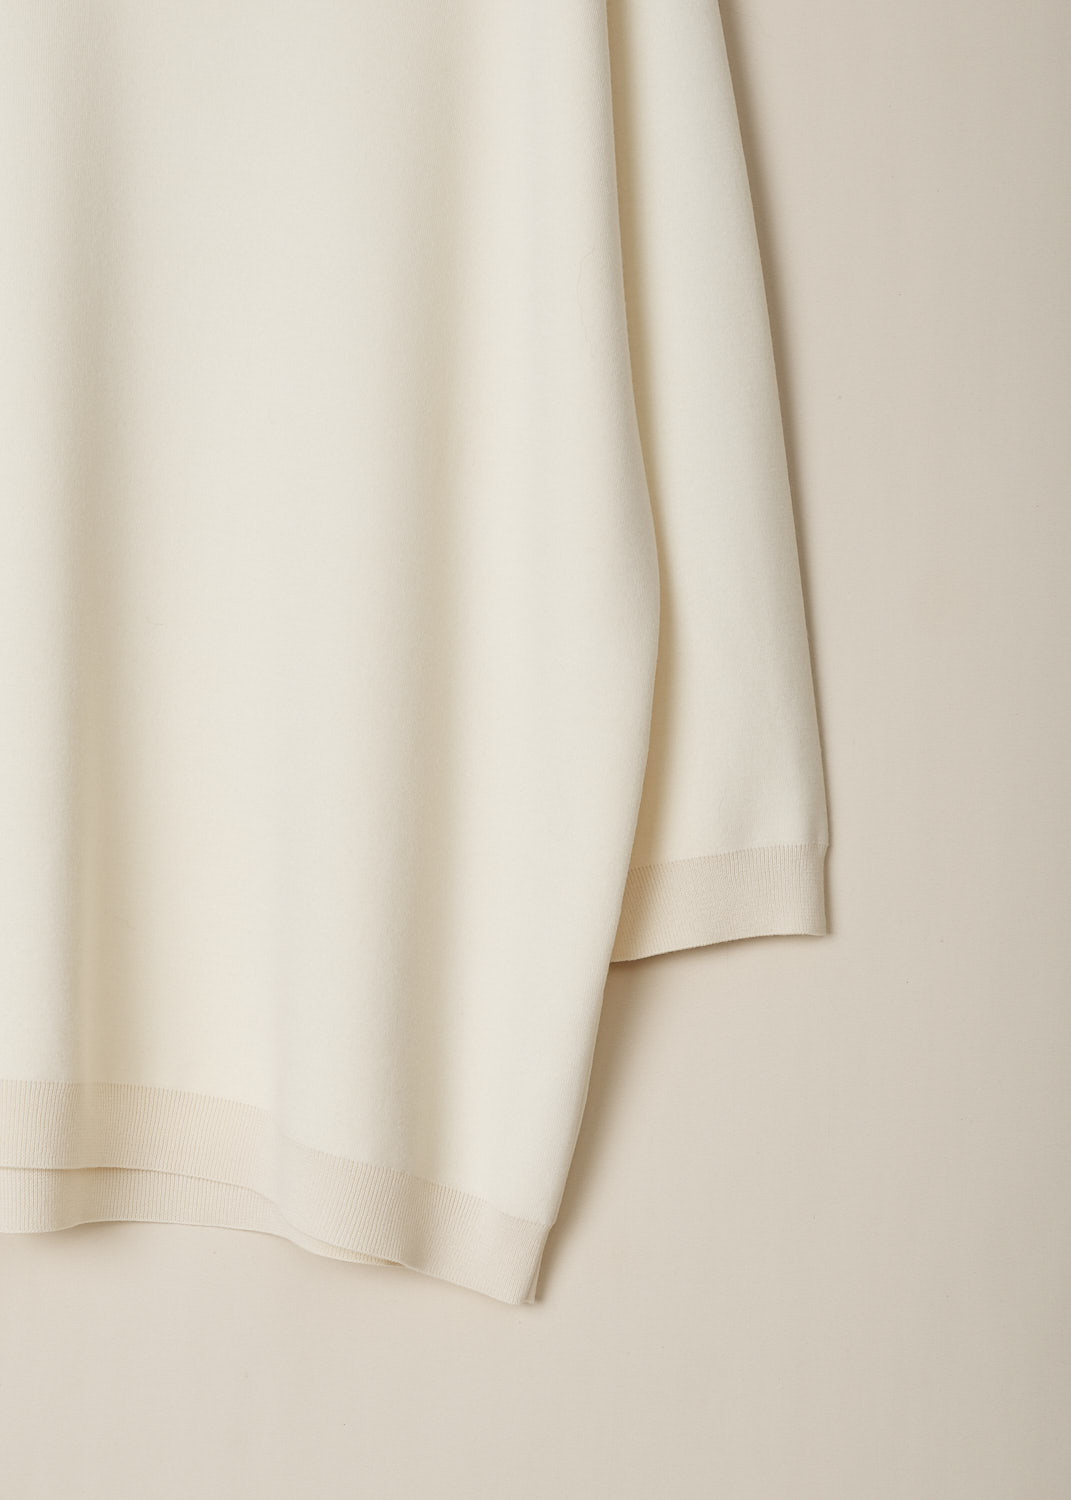 THE ROW, IVORY WHITE OVERSIZED MIRU TOP, MIRU_TOP_3227FI_BQ_IVORY, White, Detail, This ivory white oversized Miru top has a deep V-neckline. The long sleeves have dropped shoulders and ribbed cuffs. The top has a straight, ribbed hemline. 
